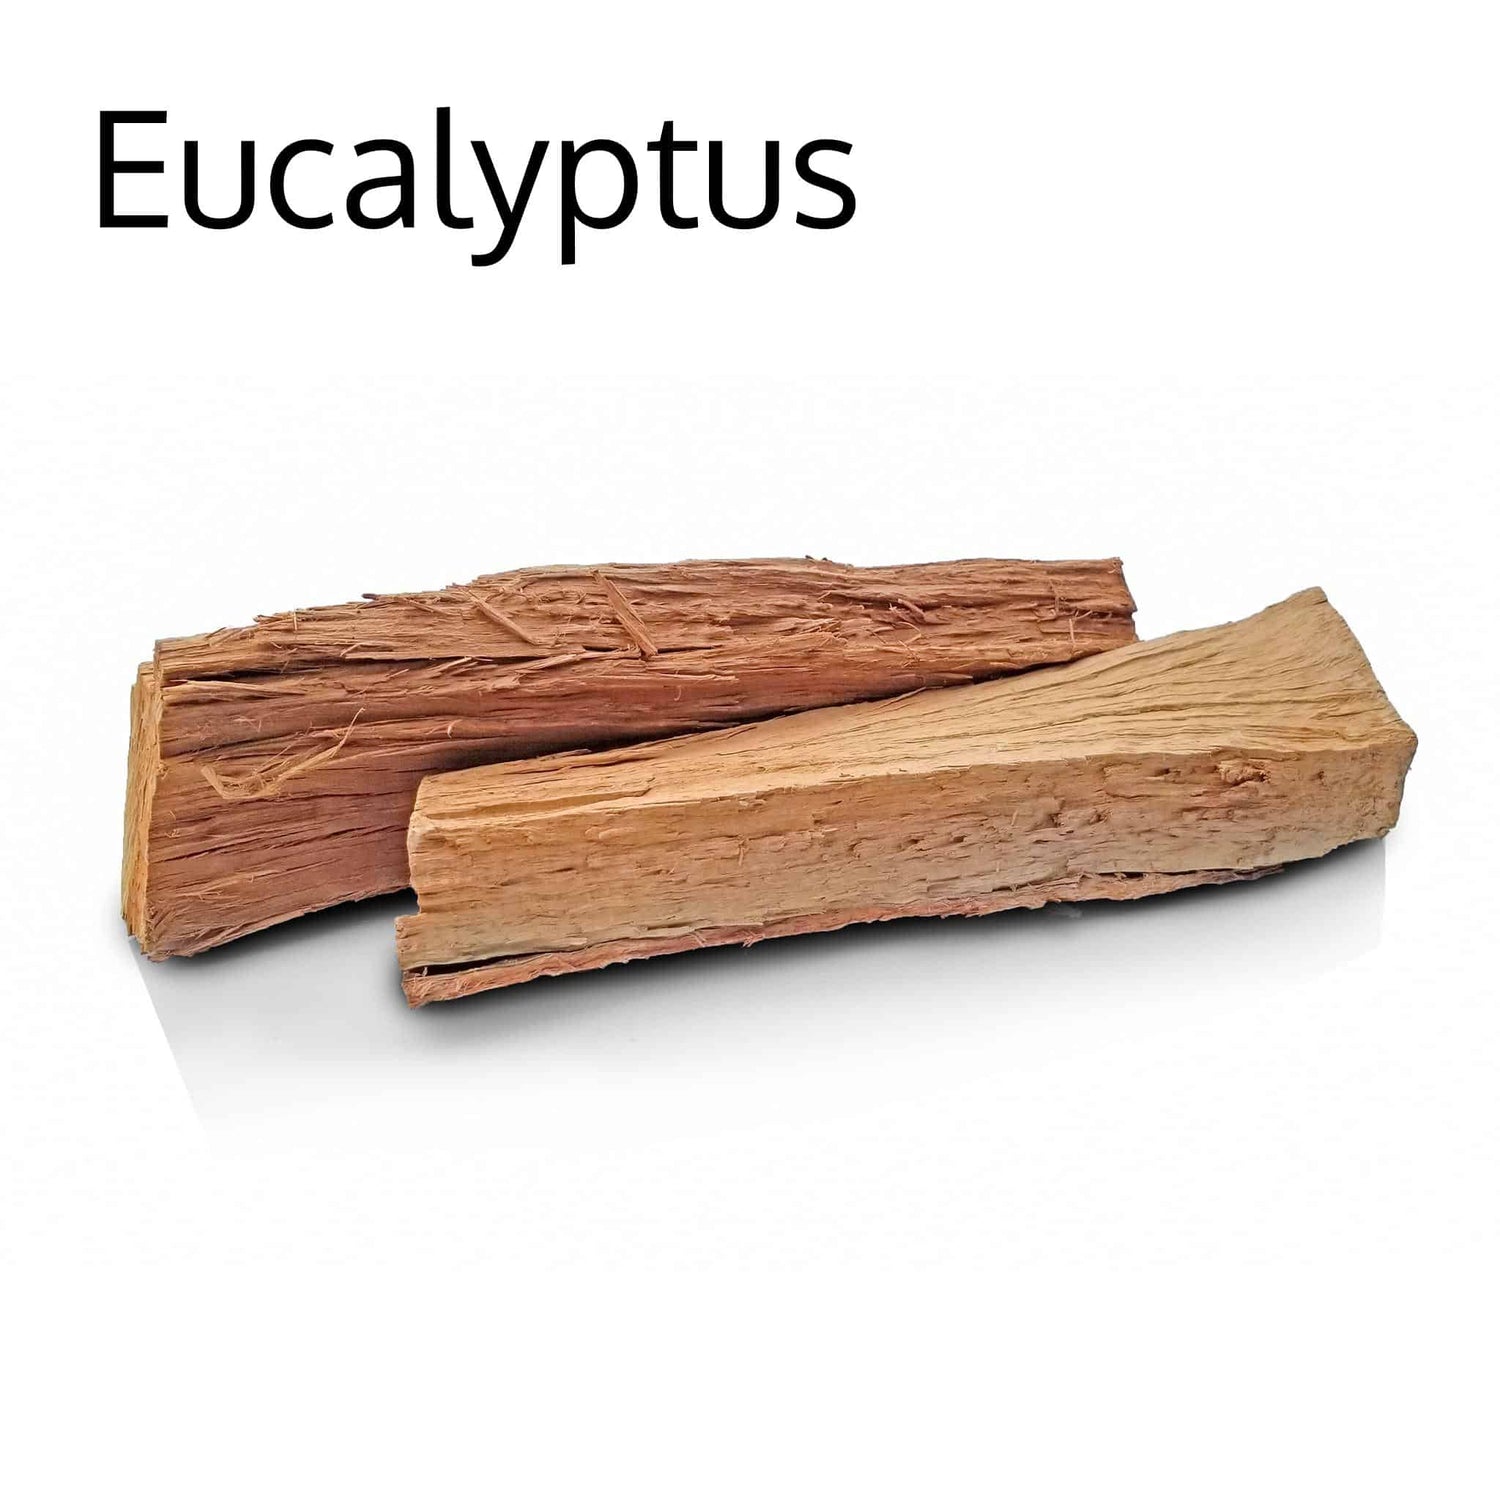 Premium eucalyptus firewood (hardwood), seasoned, very low moisture (guaranteed), free local delivery, carbon-neutral and from sustainable sources.